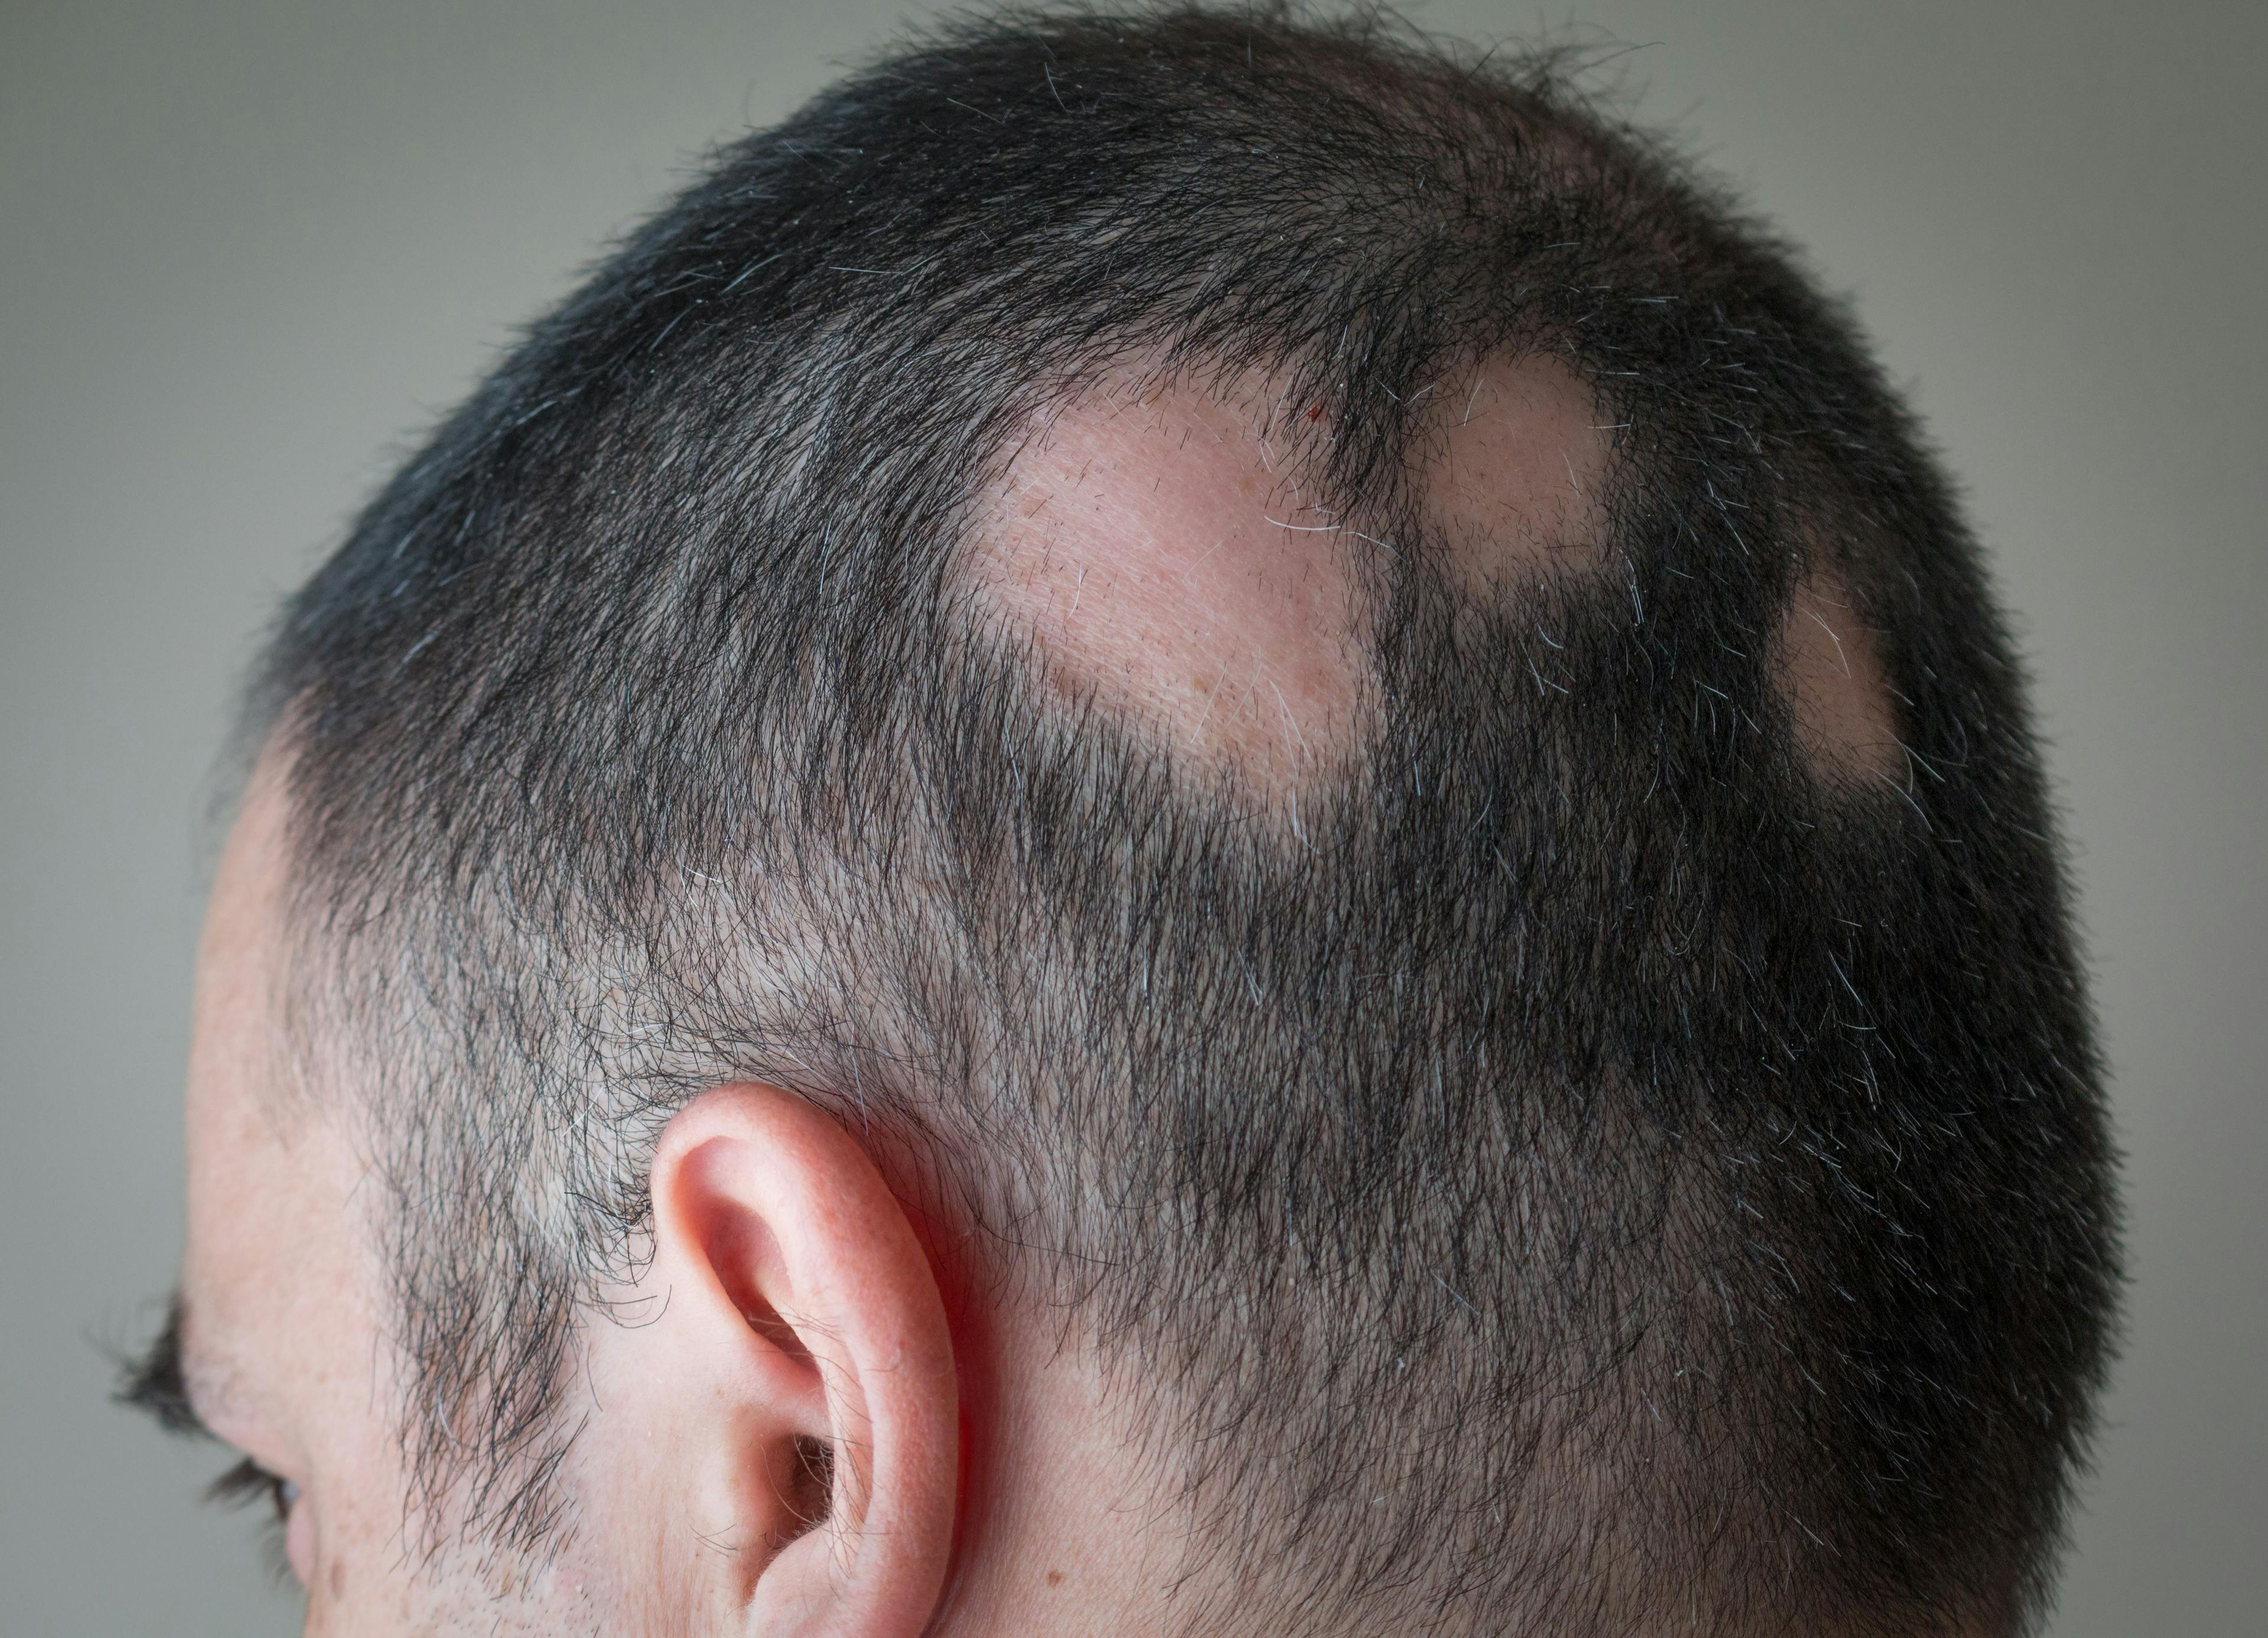 Man with bald patches | Image credit: alex papp - adobe.stock.com